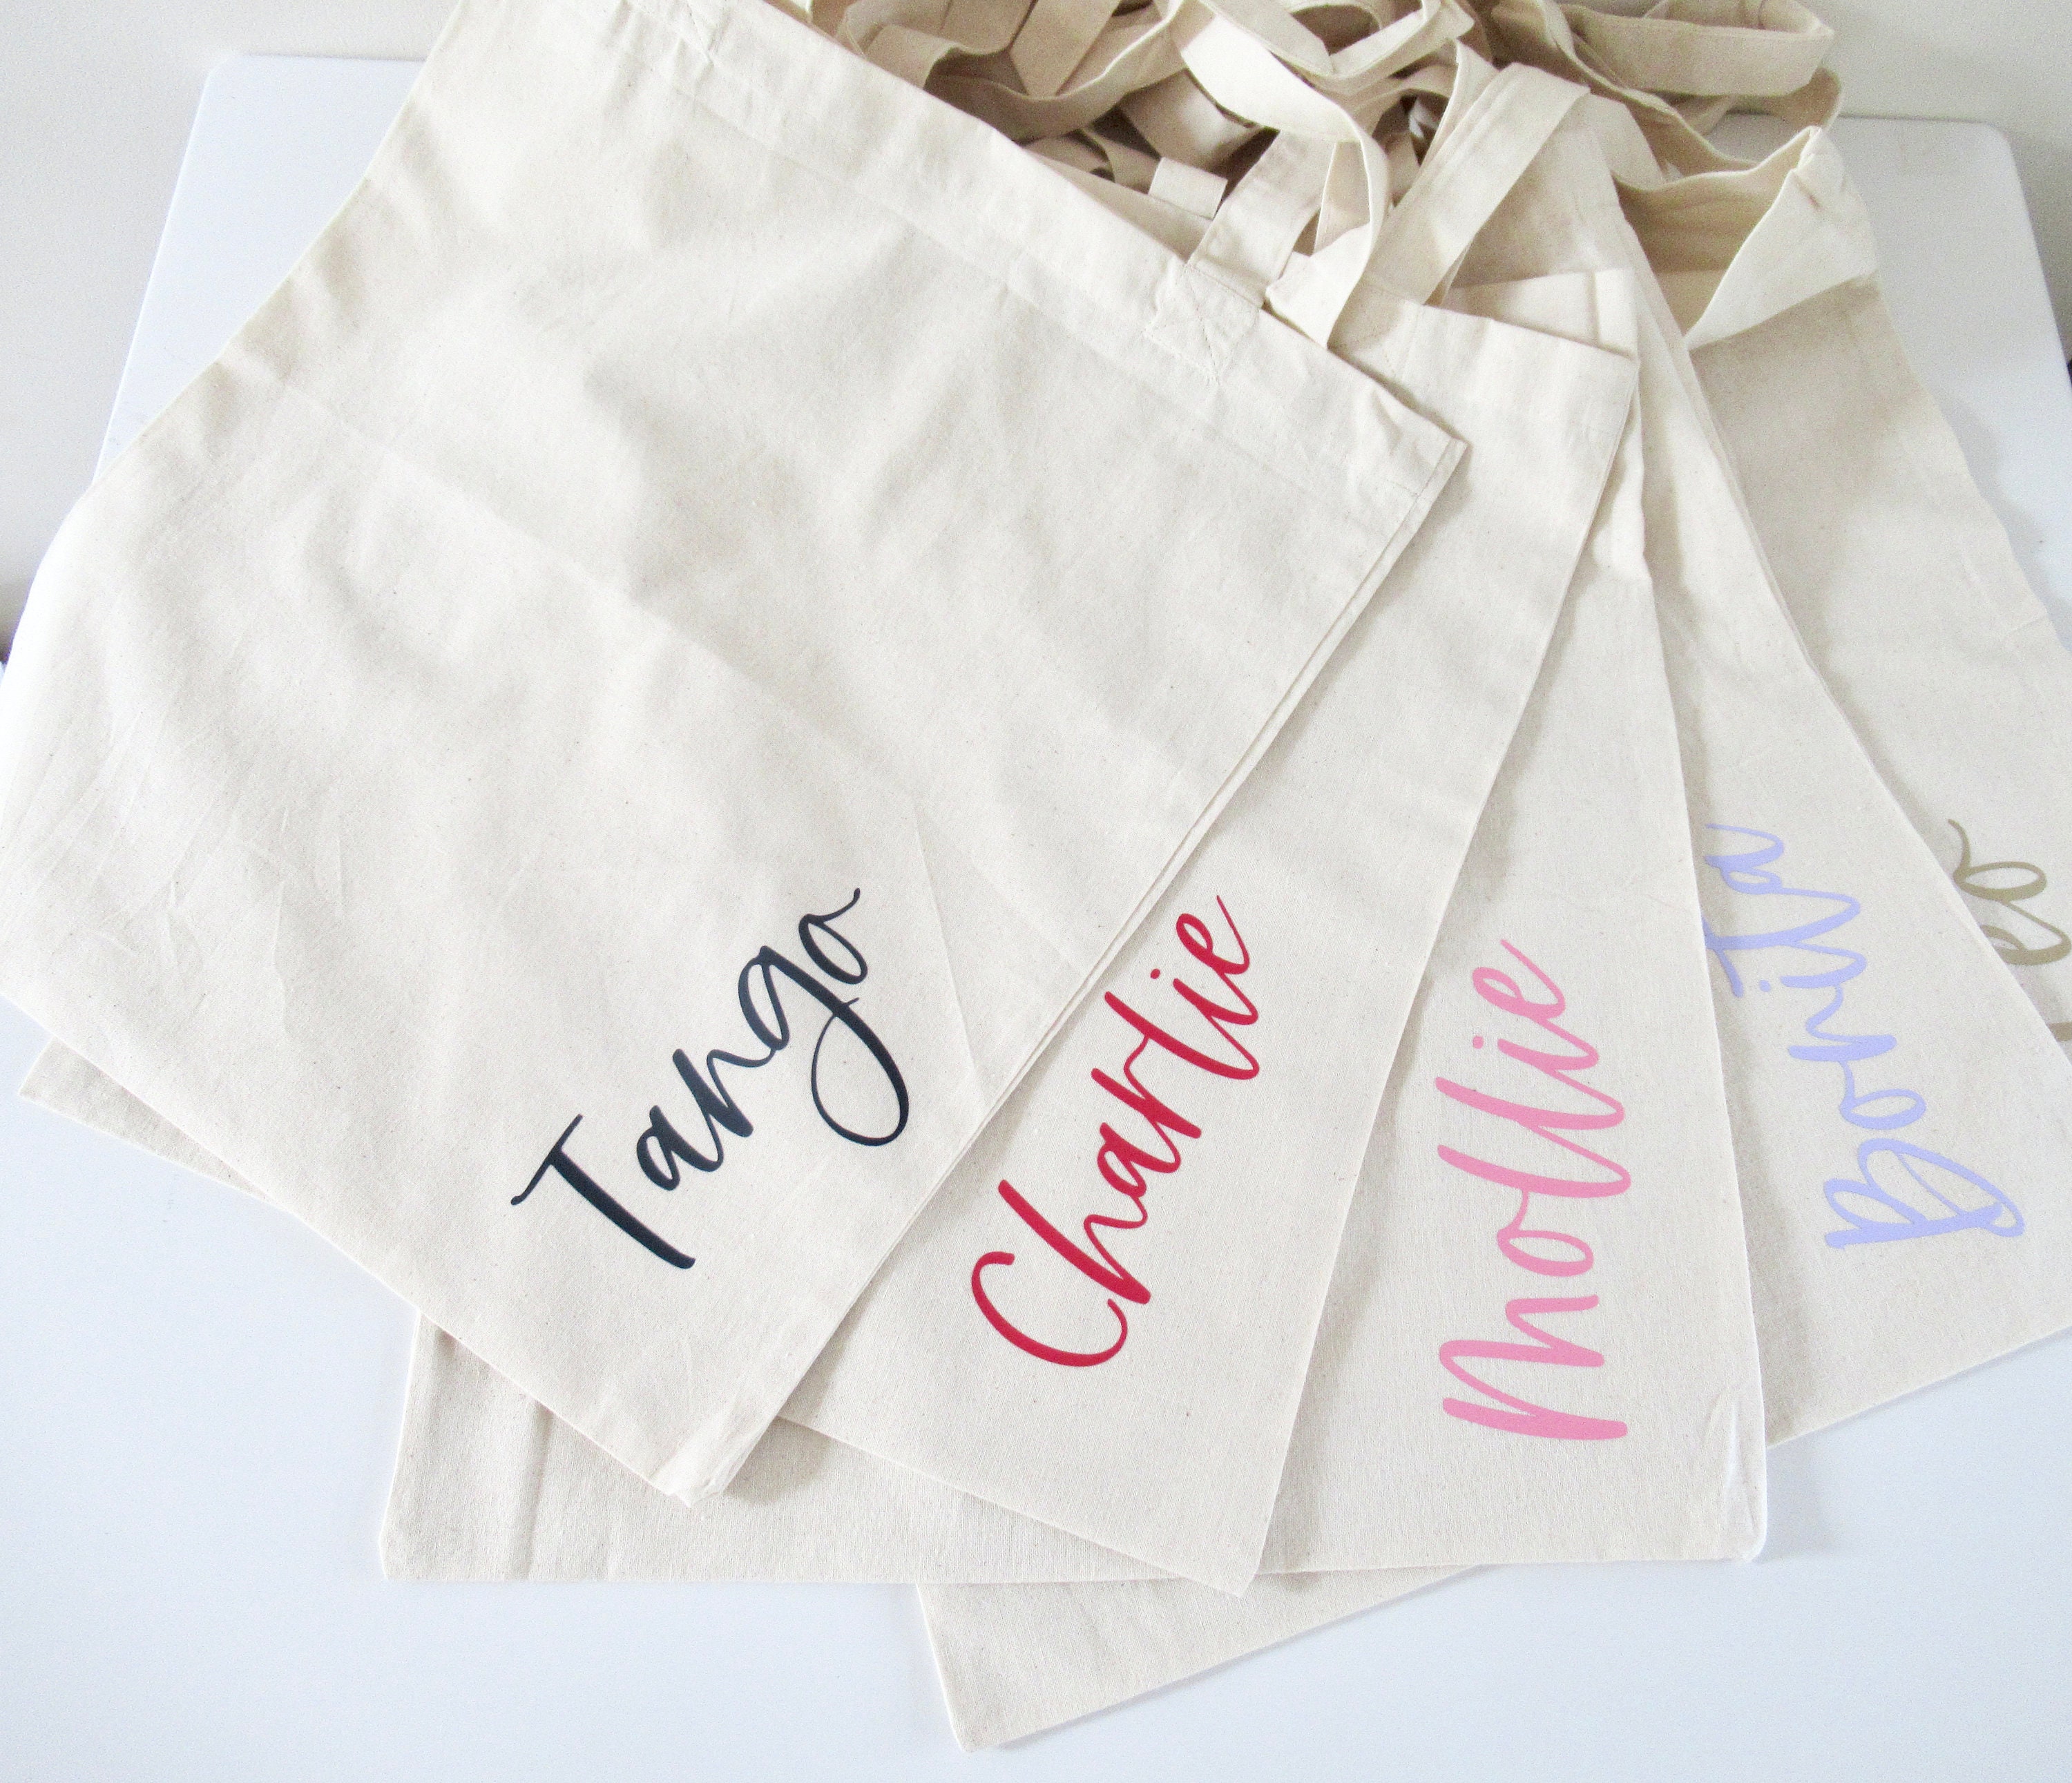 Personalised Tote Bag/ Any Name Natural Cotton Weekend Shopper -  Israel